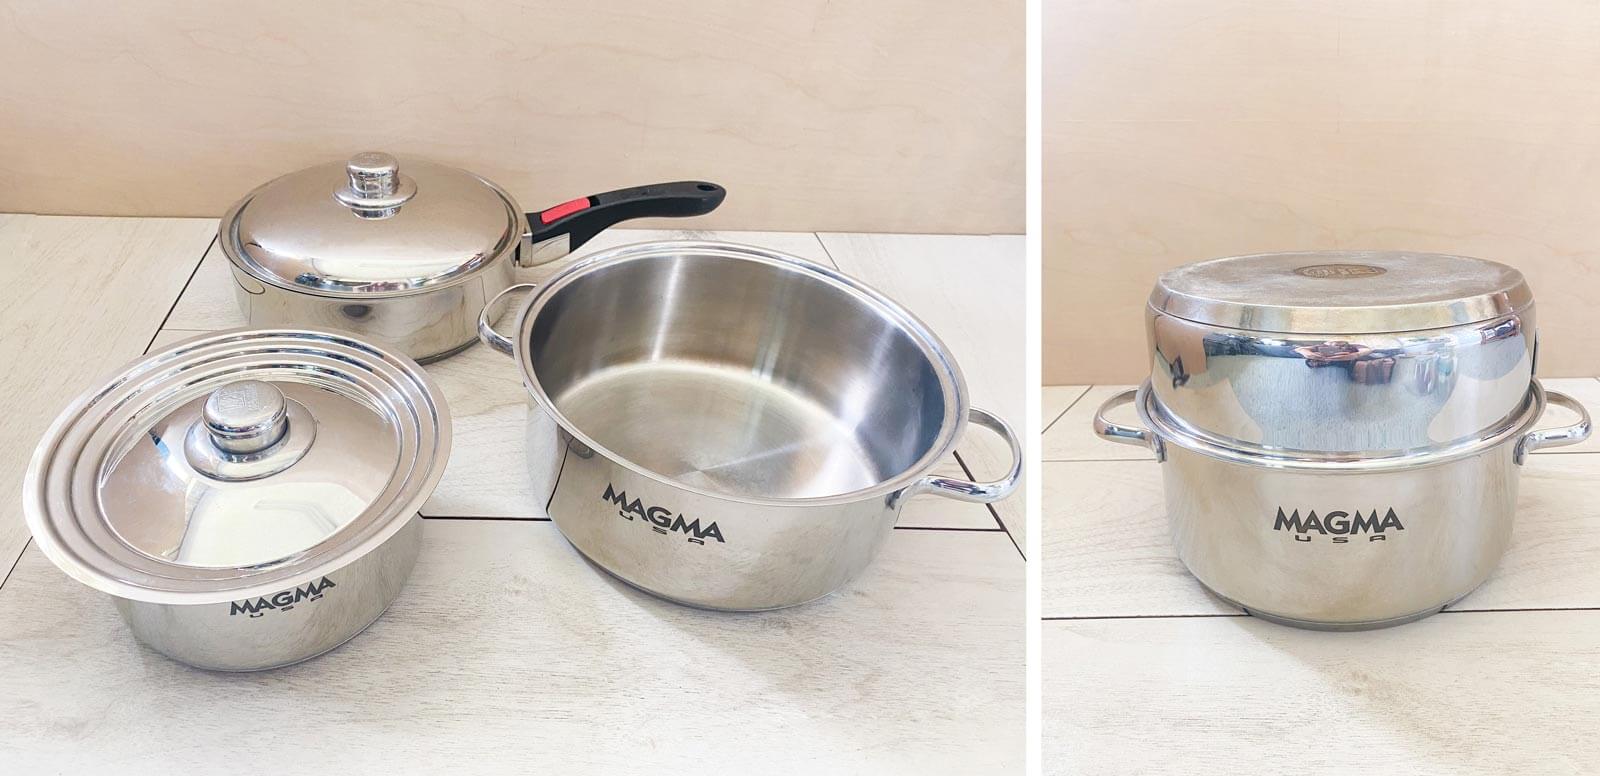 7-piece Magma nesting pot set shown as separate pieces and as stacked